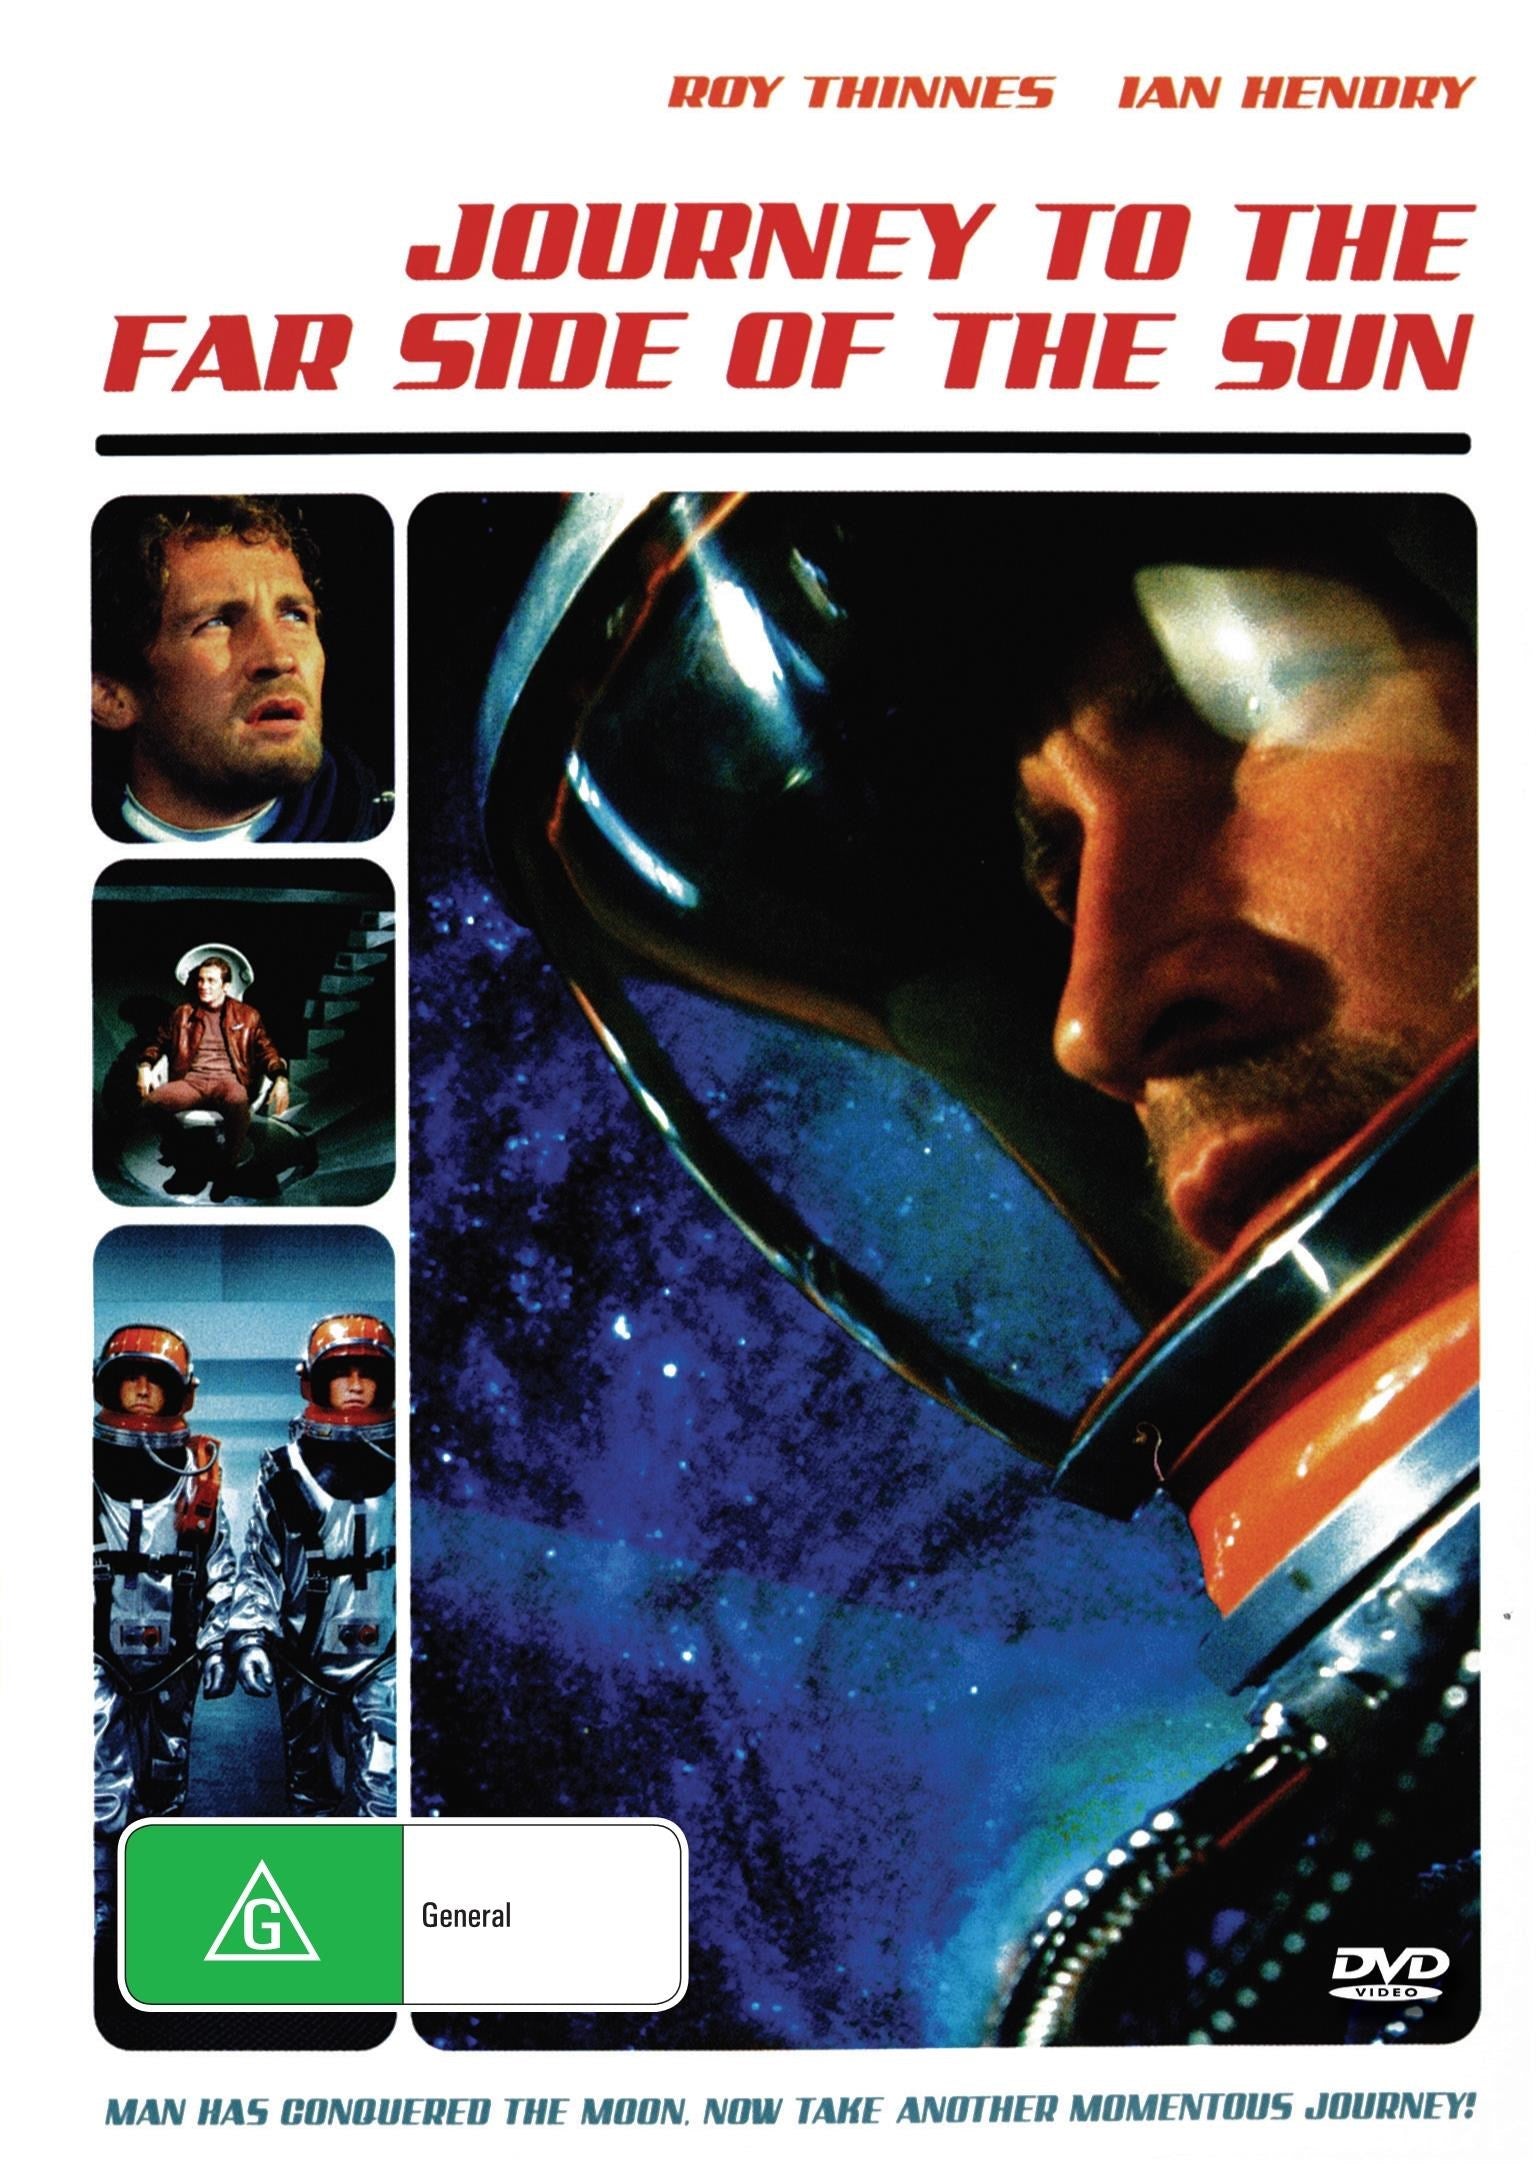 Journey To The Far Side Of The Sun rareandcollectibledvds